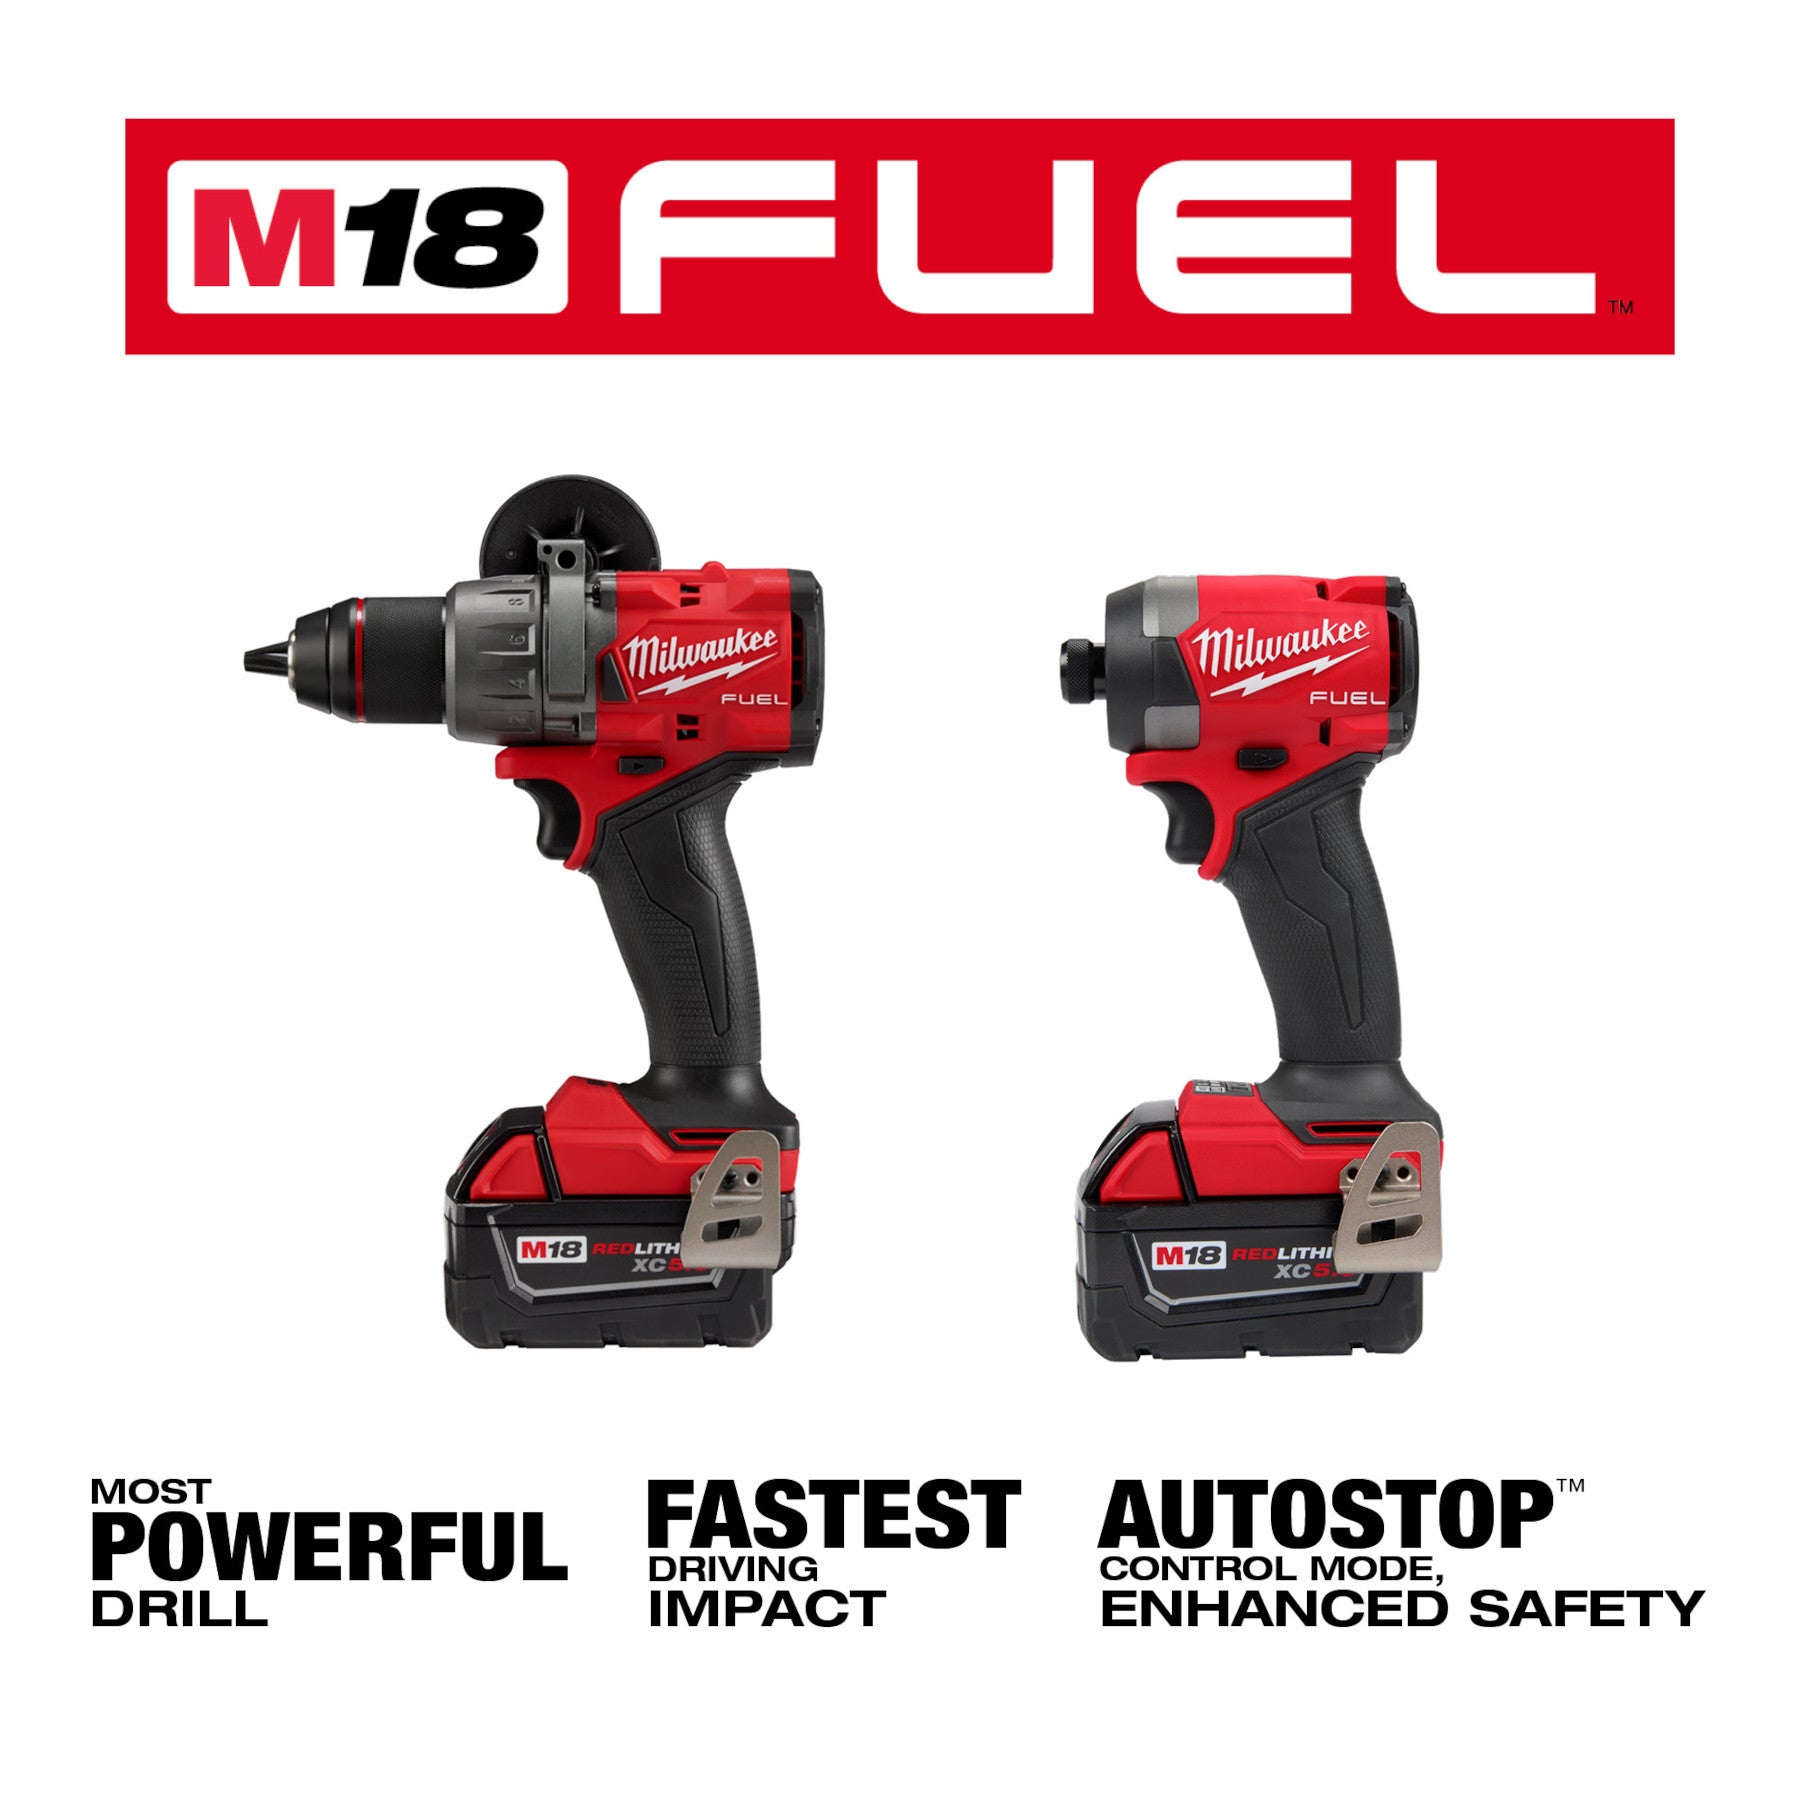 Milwaukee 3697-22 18V M18 Fuel Lithium-Ion Brushless Cordless 2-Tool Combo Kit with 1/2" Hammer Drill and 1/4" Hex Impact Drive